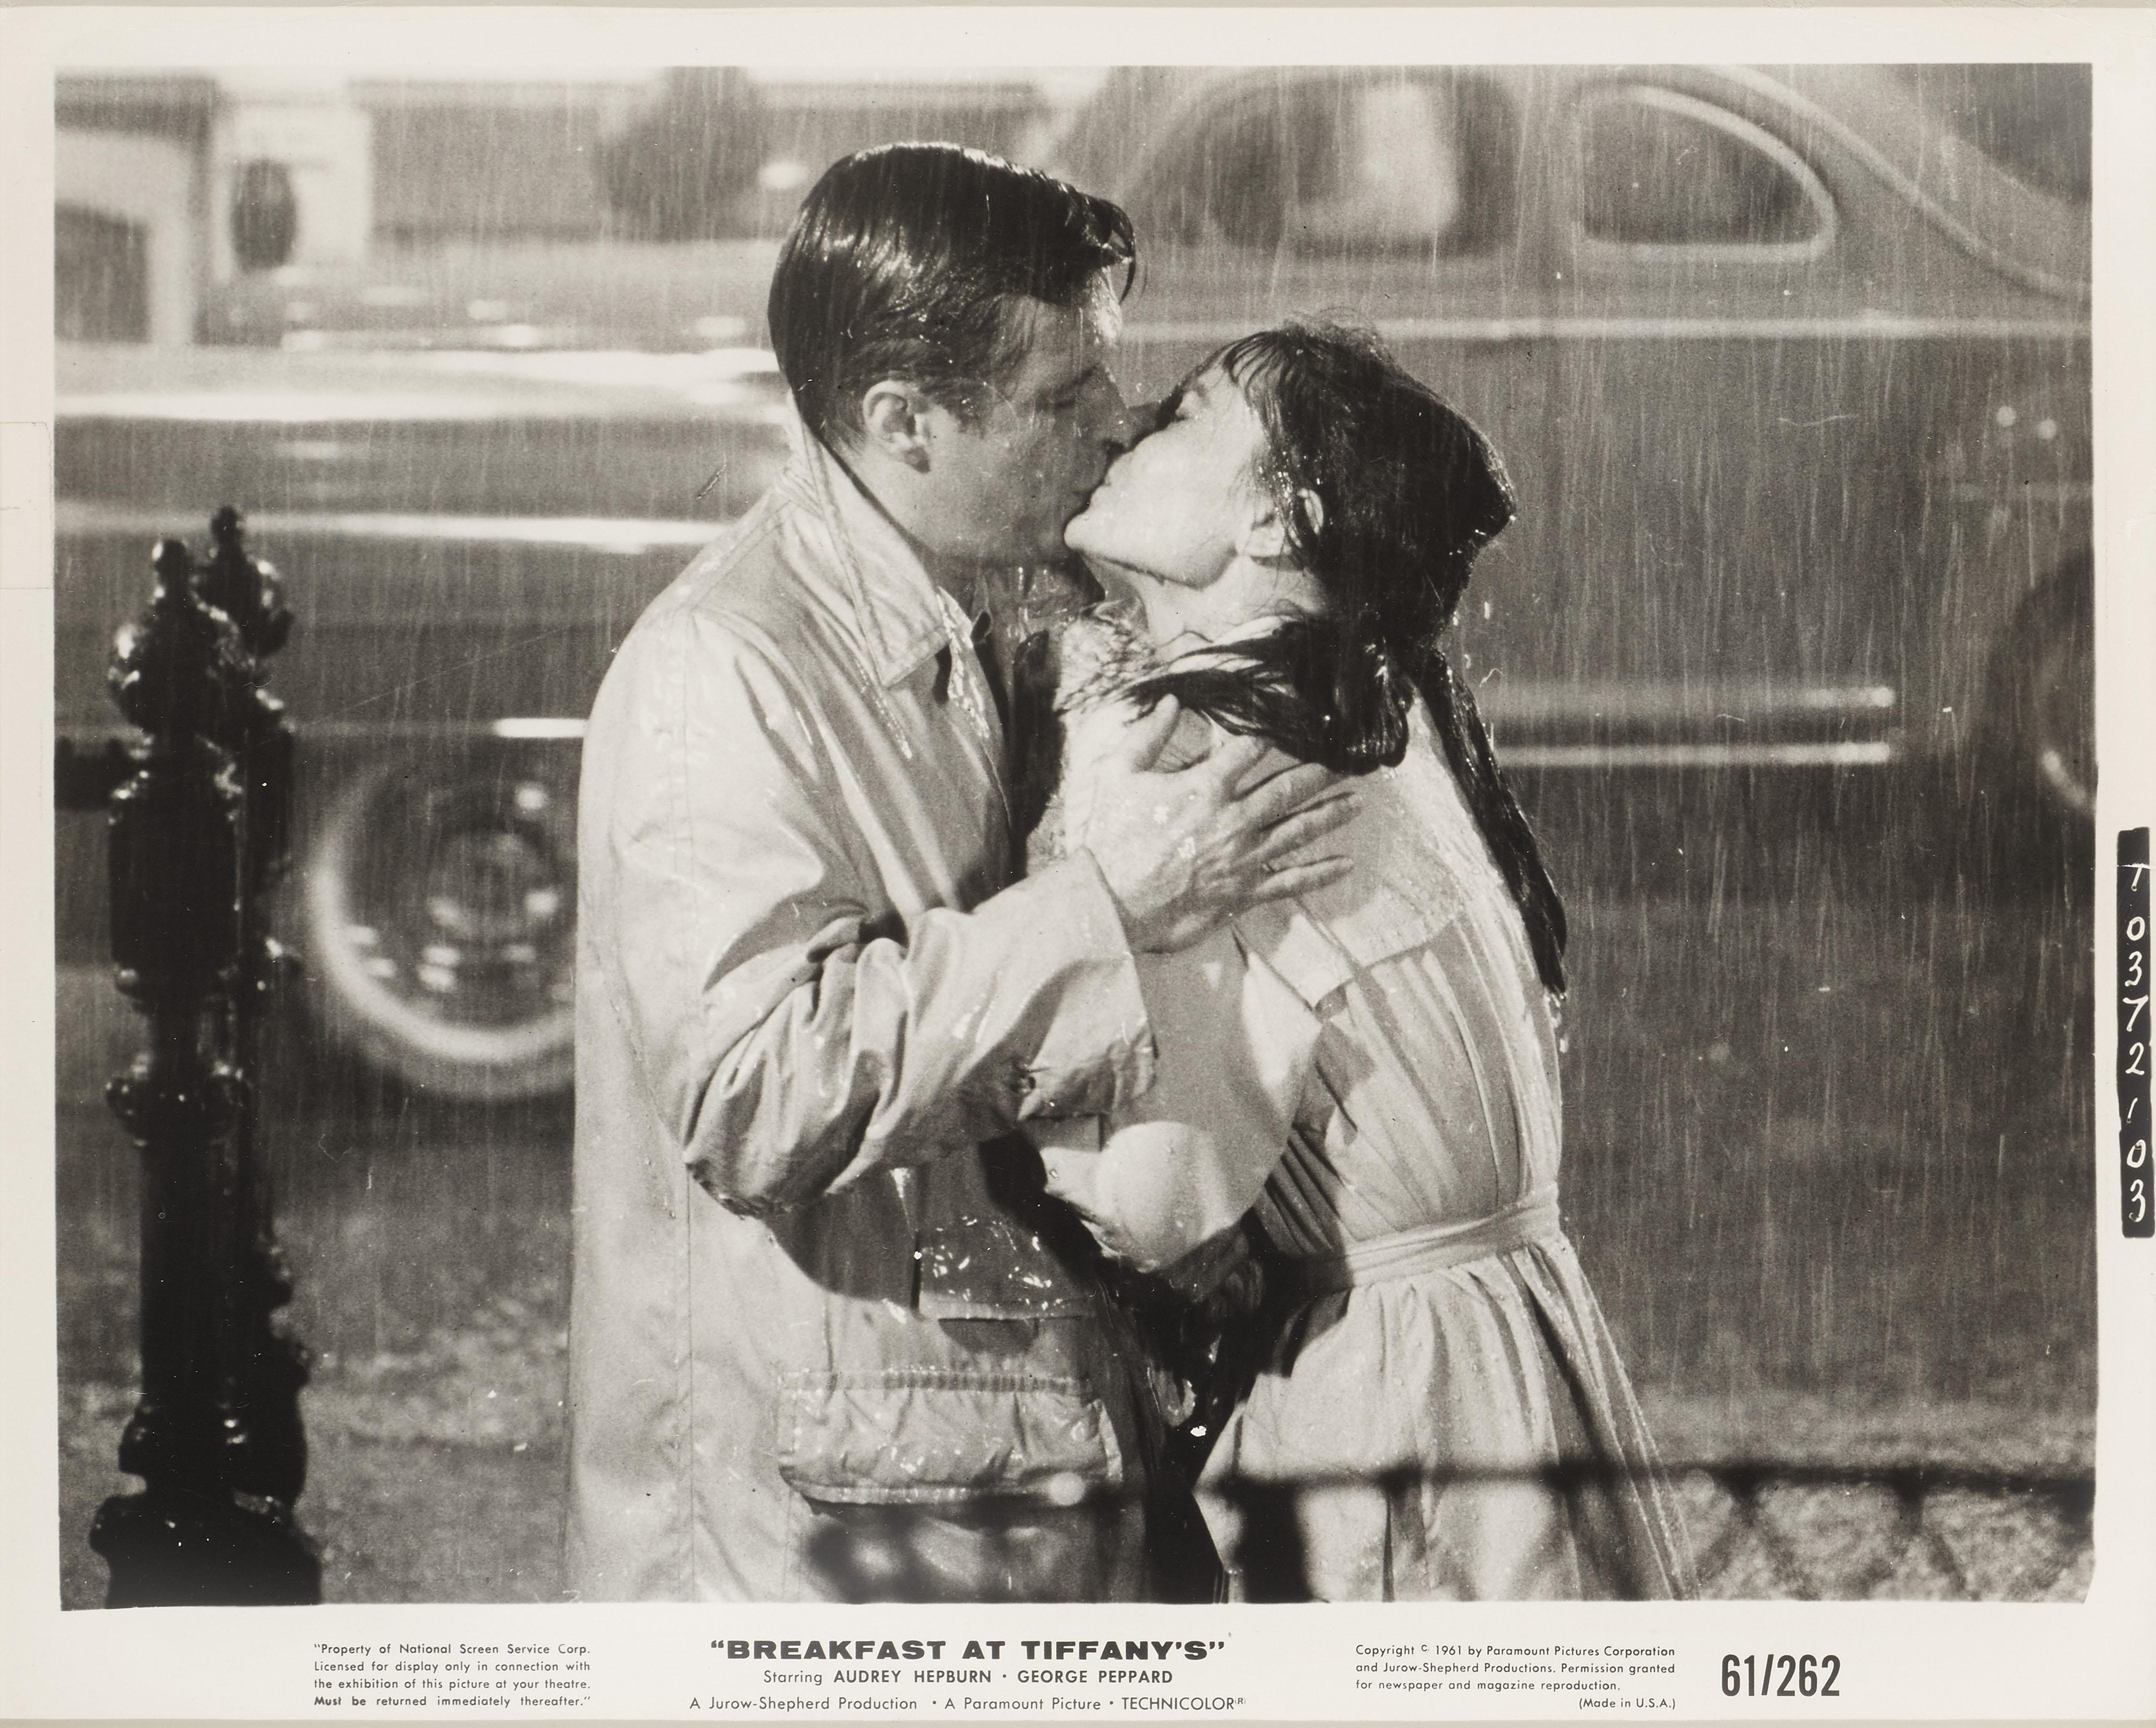 Original black and white photographic production still for the legendary 1961 Audrey Hepburn Comedy, Romance. This film was directed by Blake Edwards, and stars Audrey Hepburn and George Peppard. This is undoubtedly Hepburn's most famous and iconic